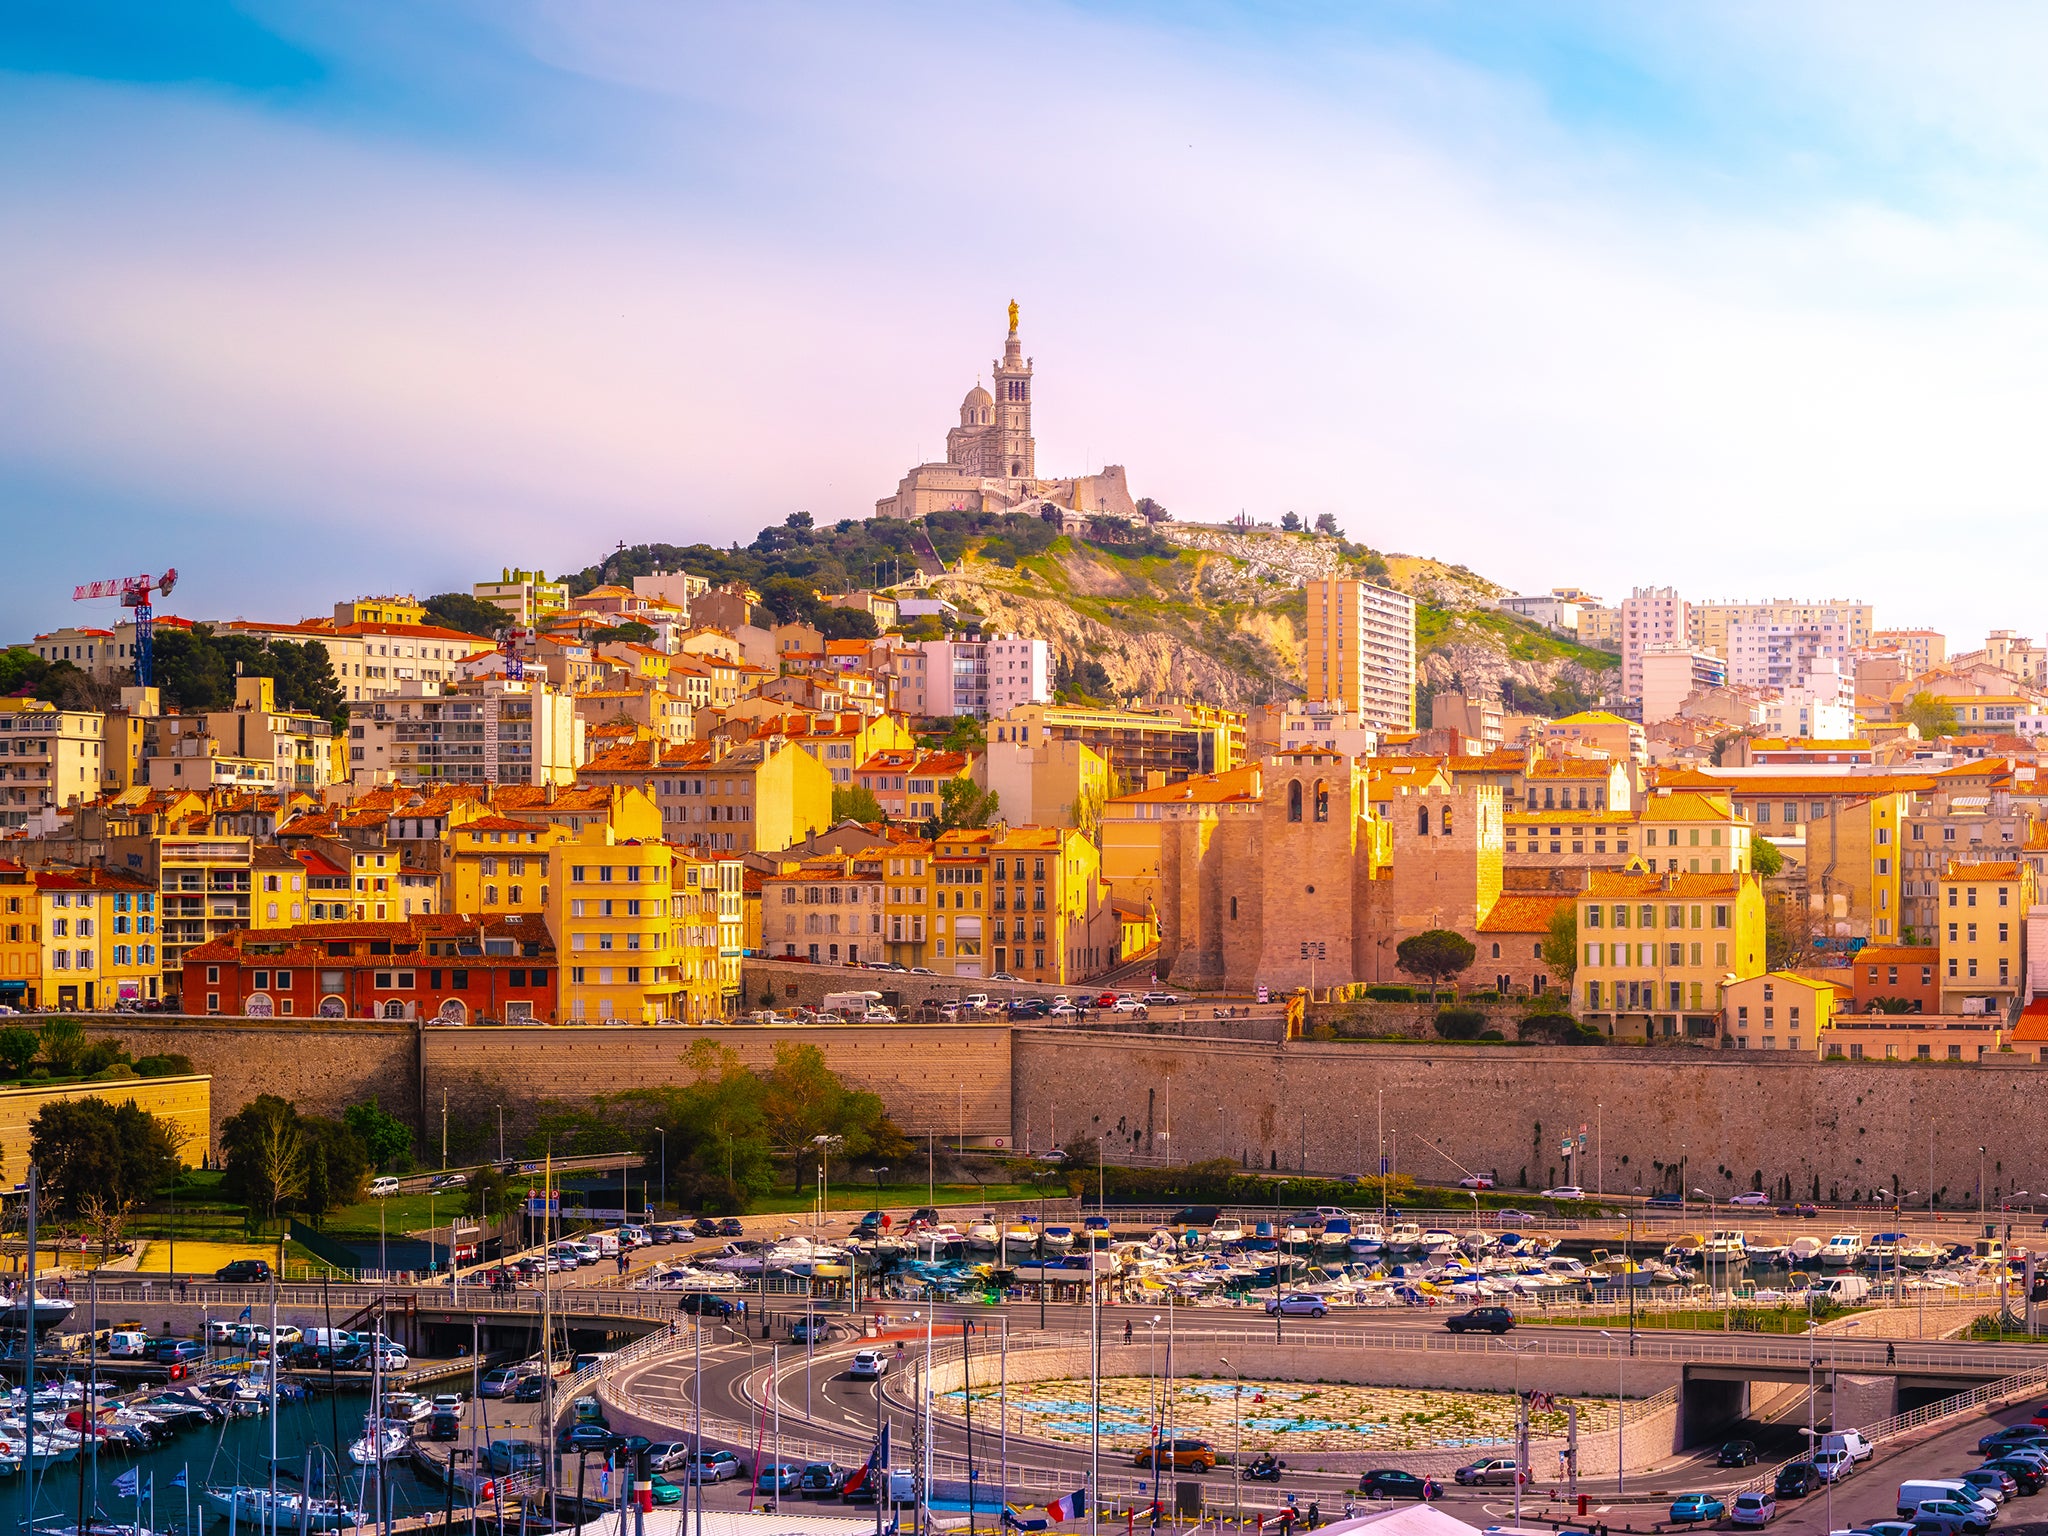 A view of Marseille with Notre-Dame de la Garde basilica on top of the hill